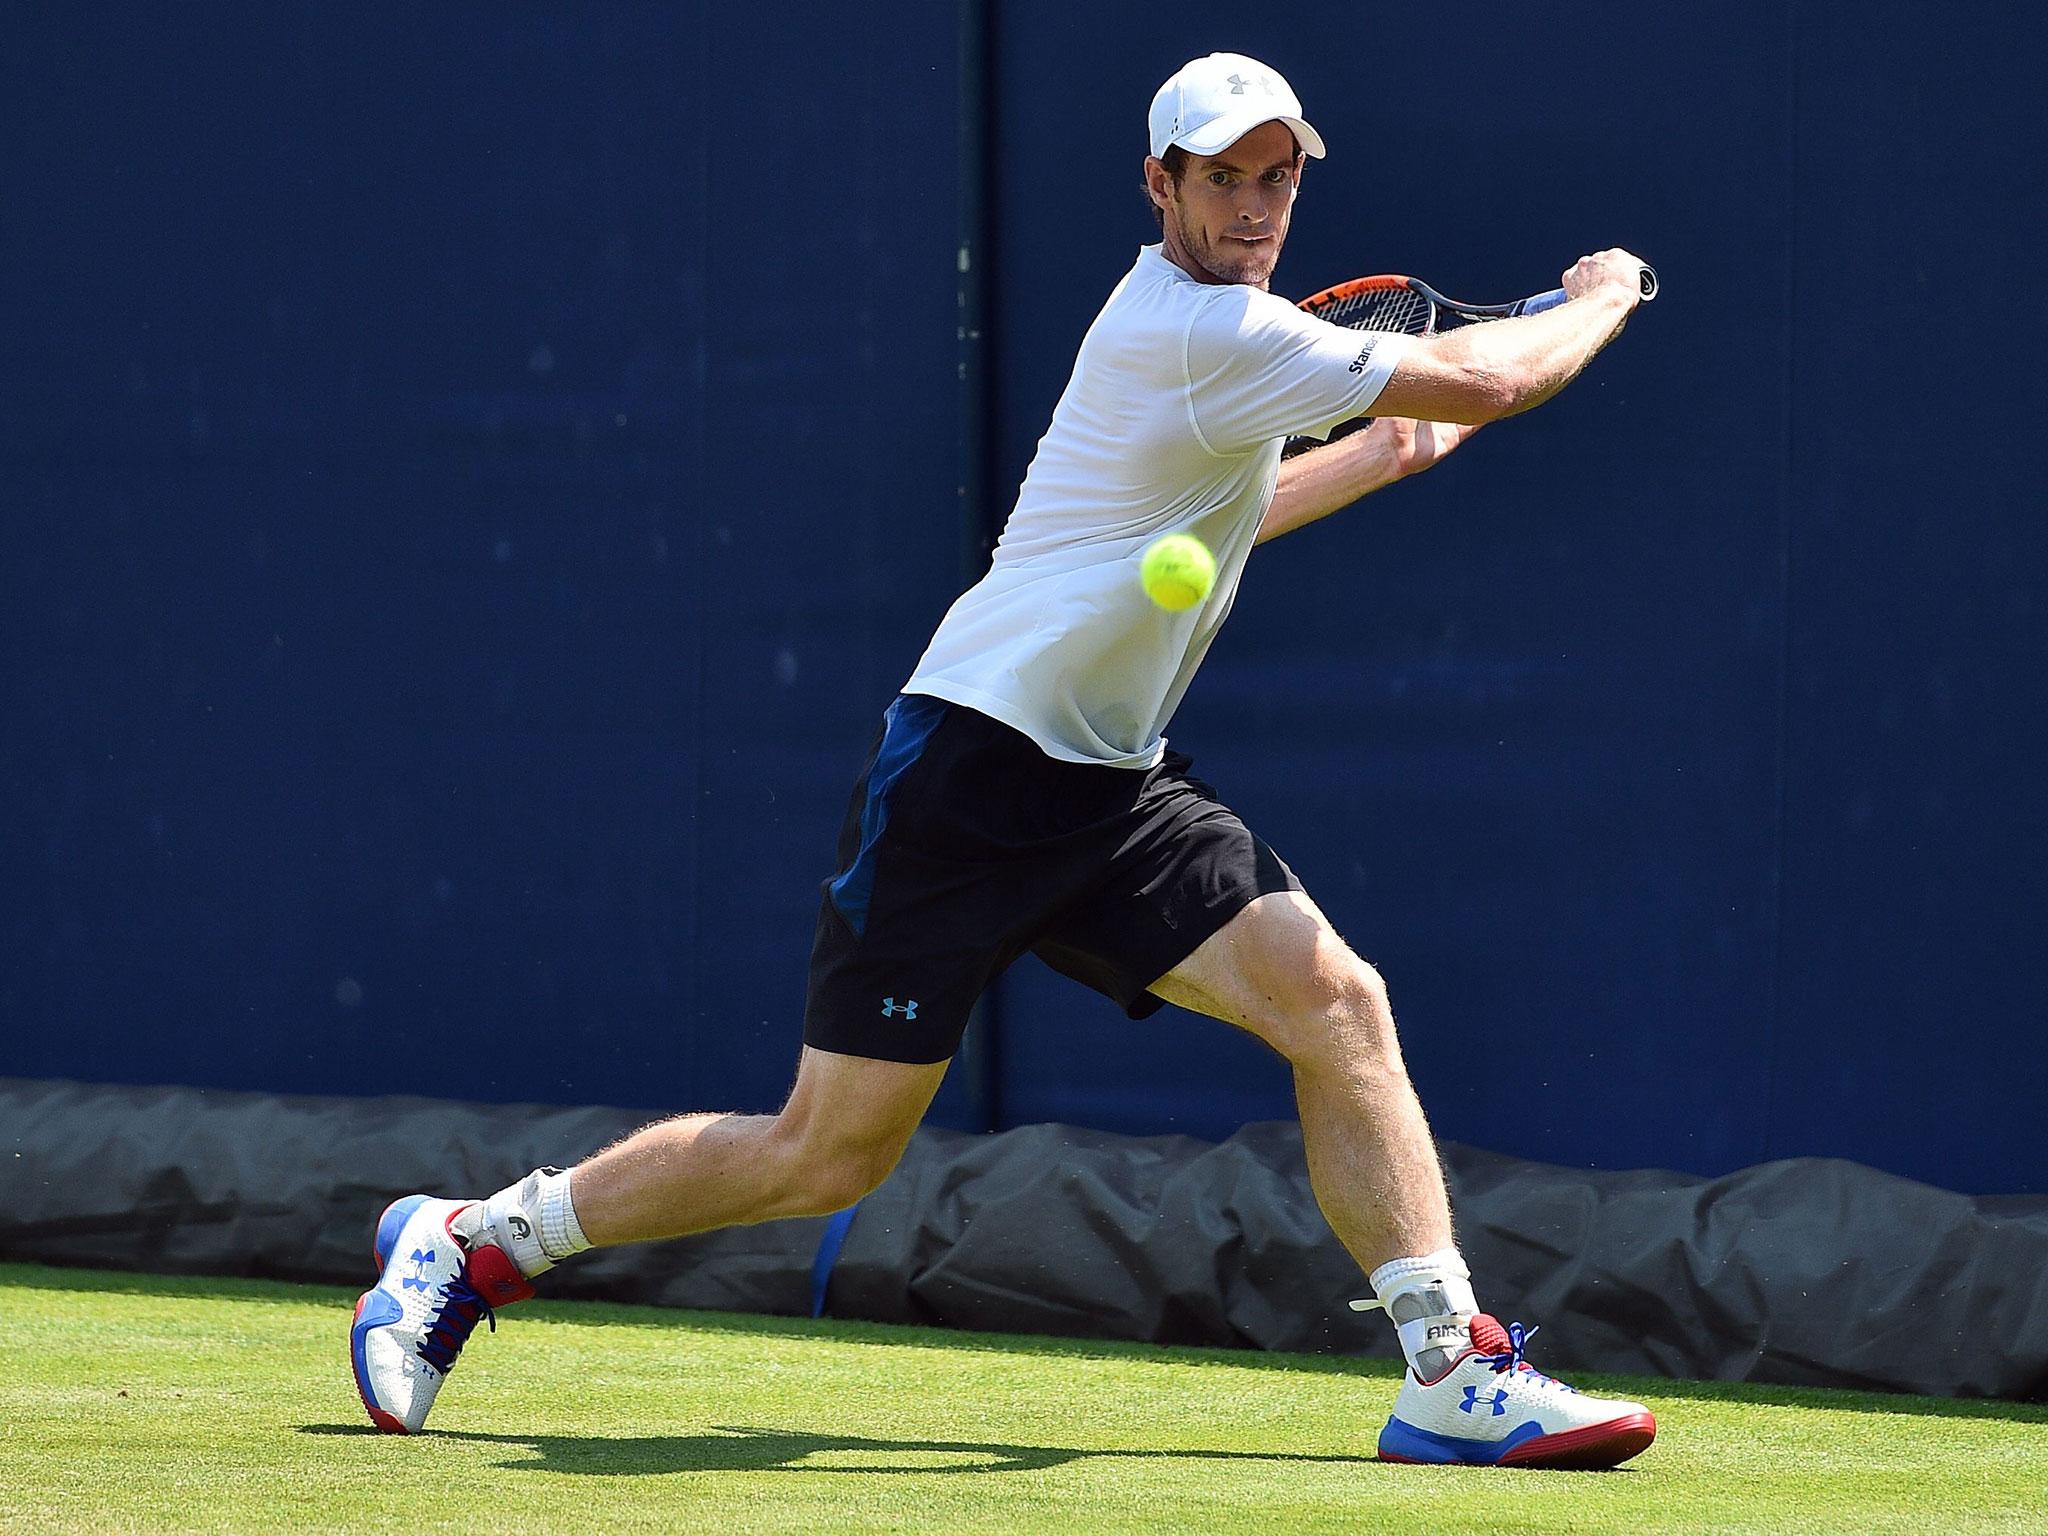 Andy Murray will take on Lucas Pouille on Tuesday in one of two exhibition matches